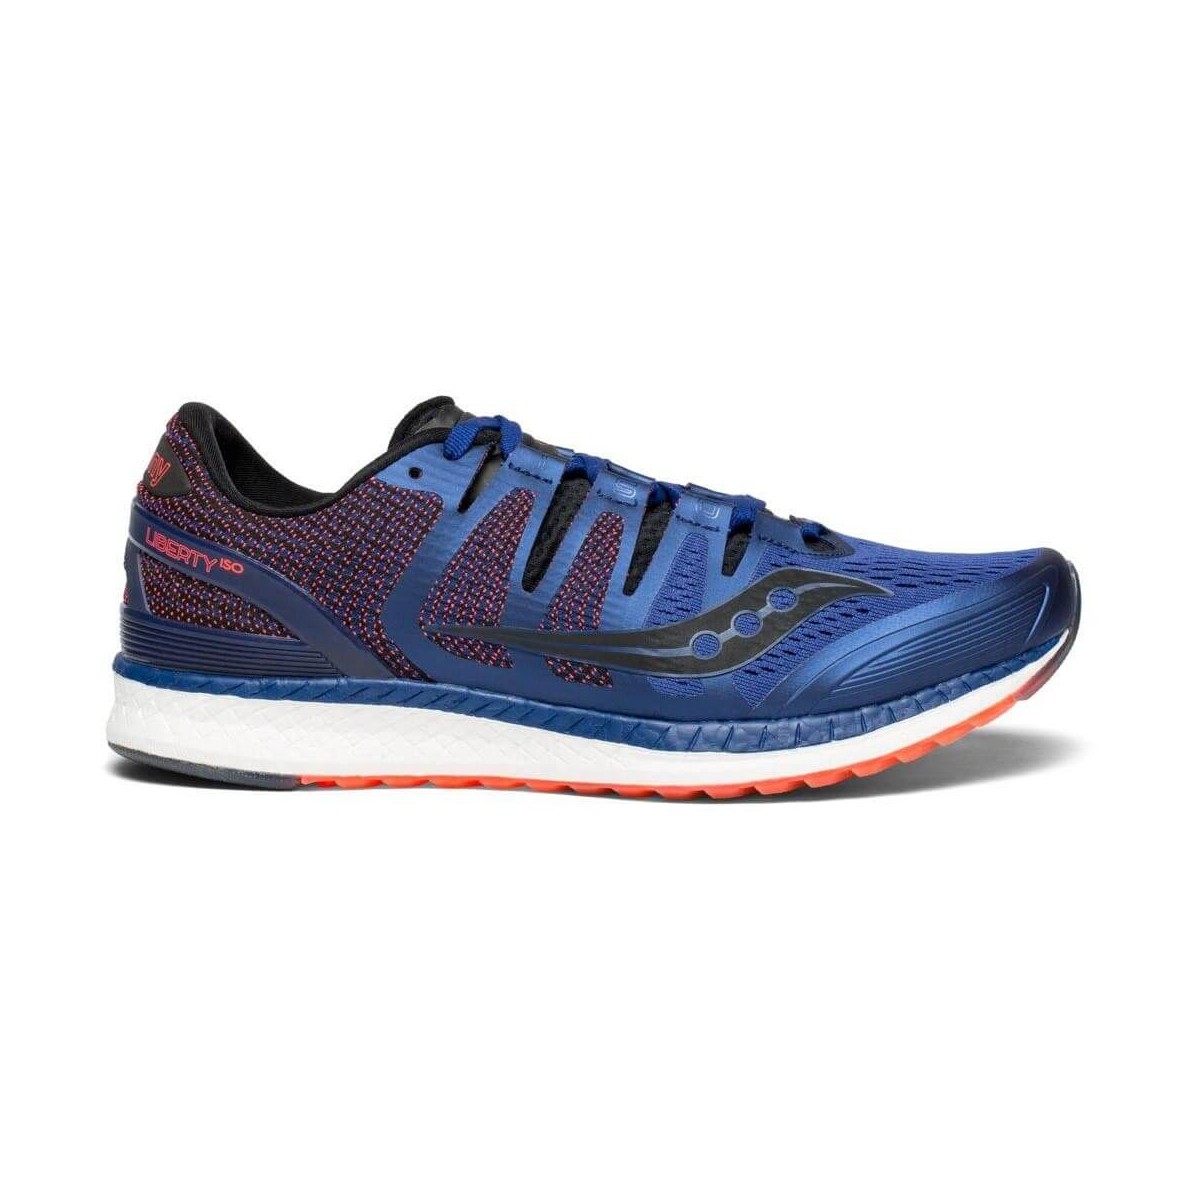 Saucony Liberty Iso Running Shoes Blue Orange